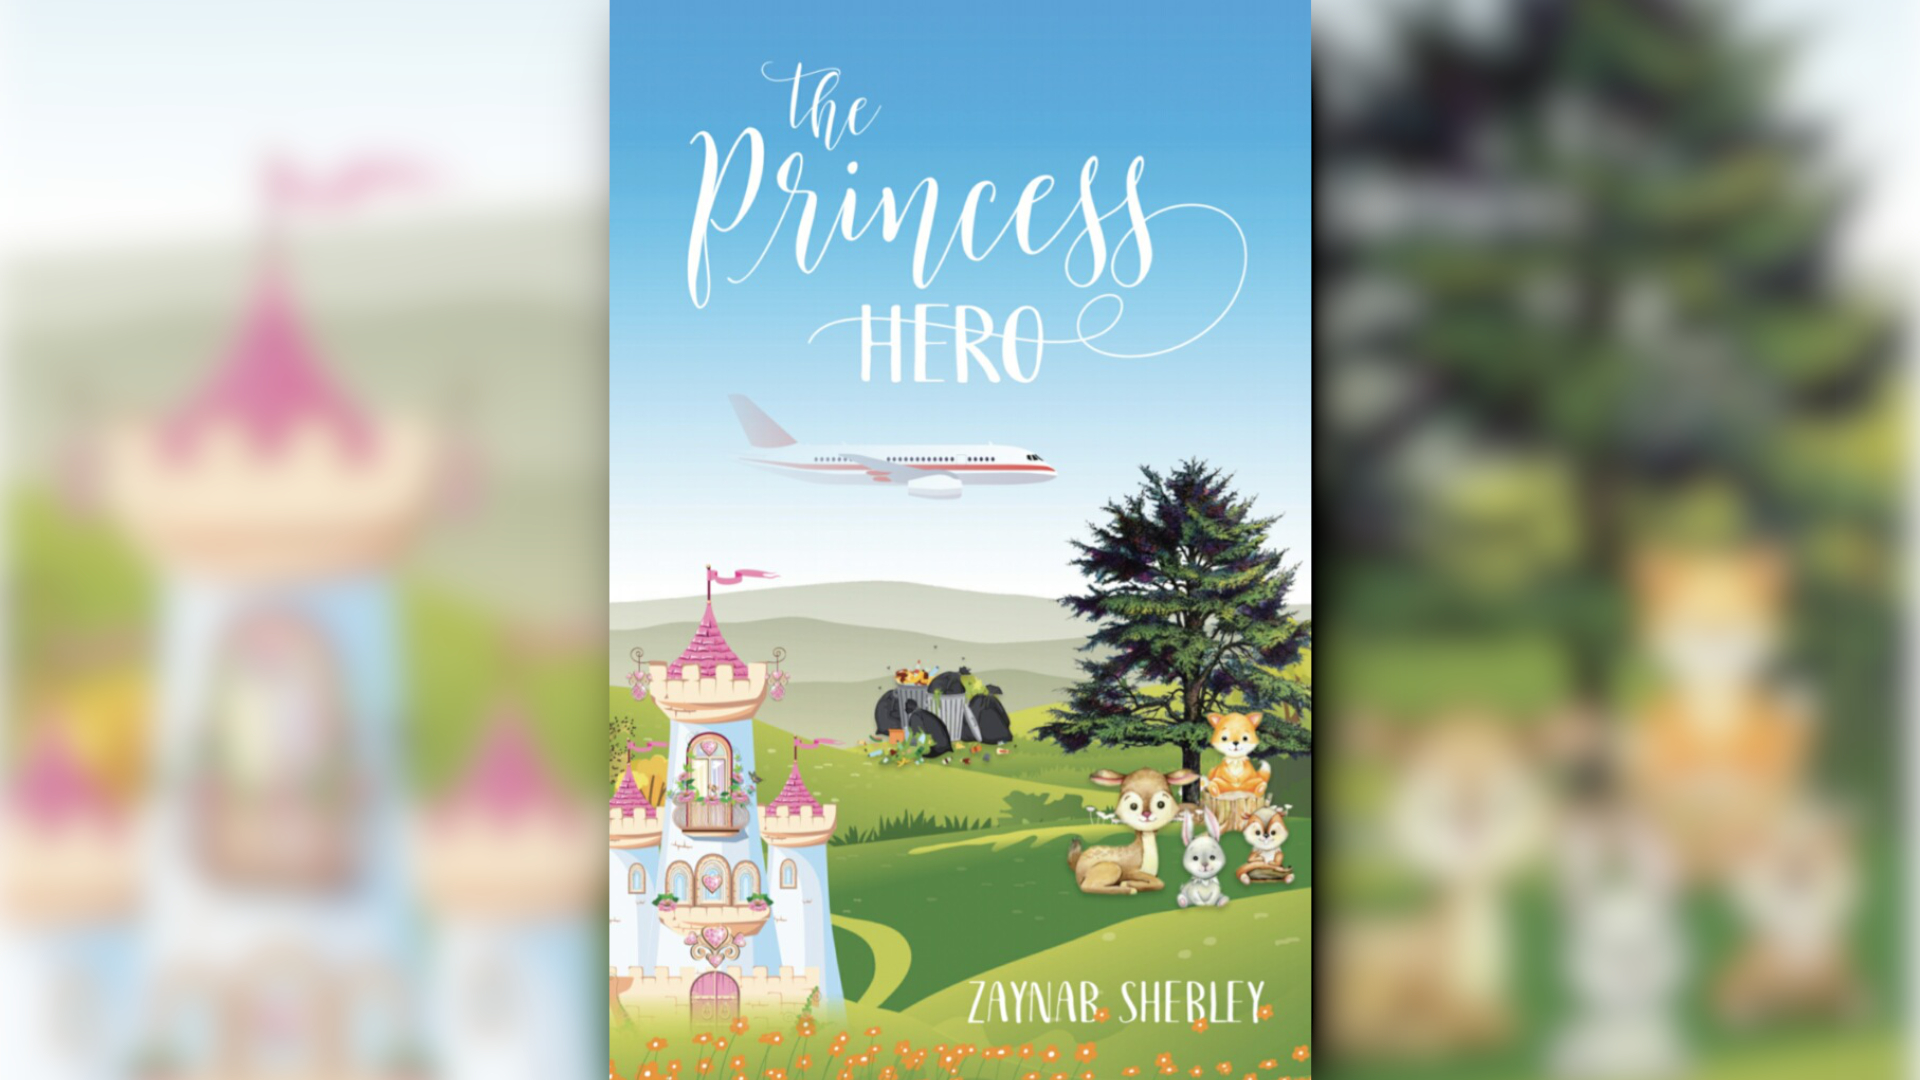 Front cover of 11-year-old author Zaynab Shebley's new children's book The Princess Hero